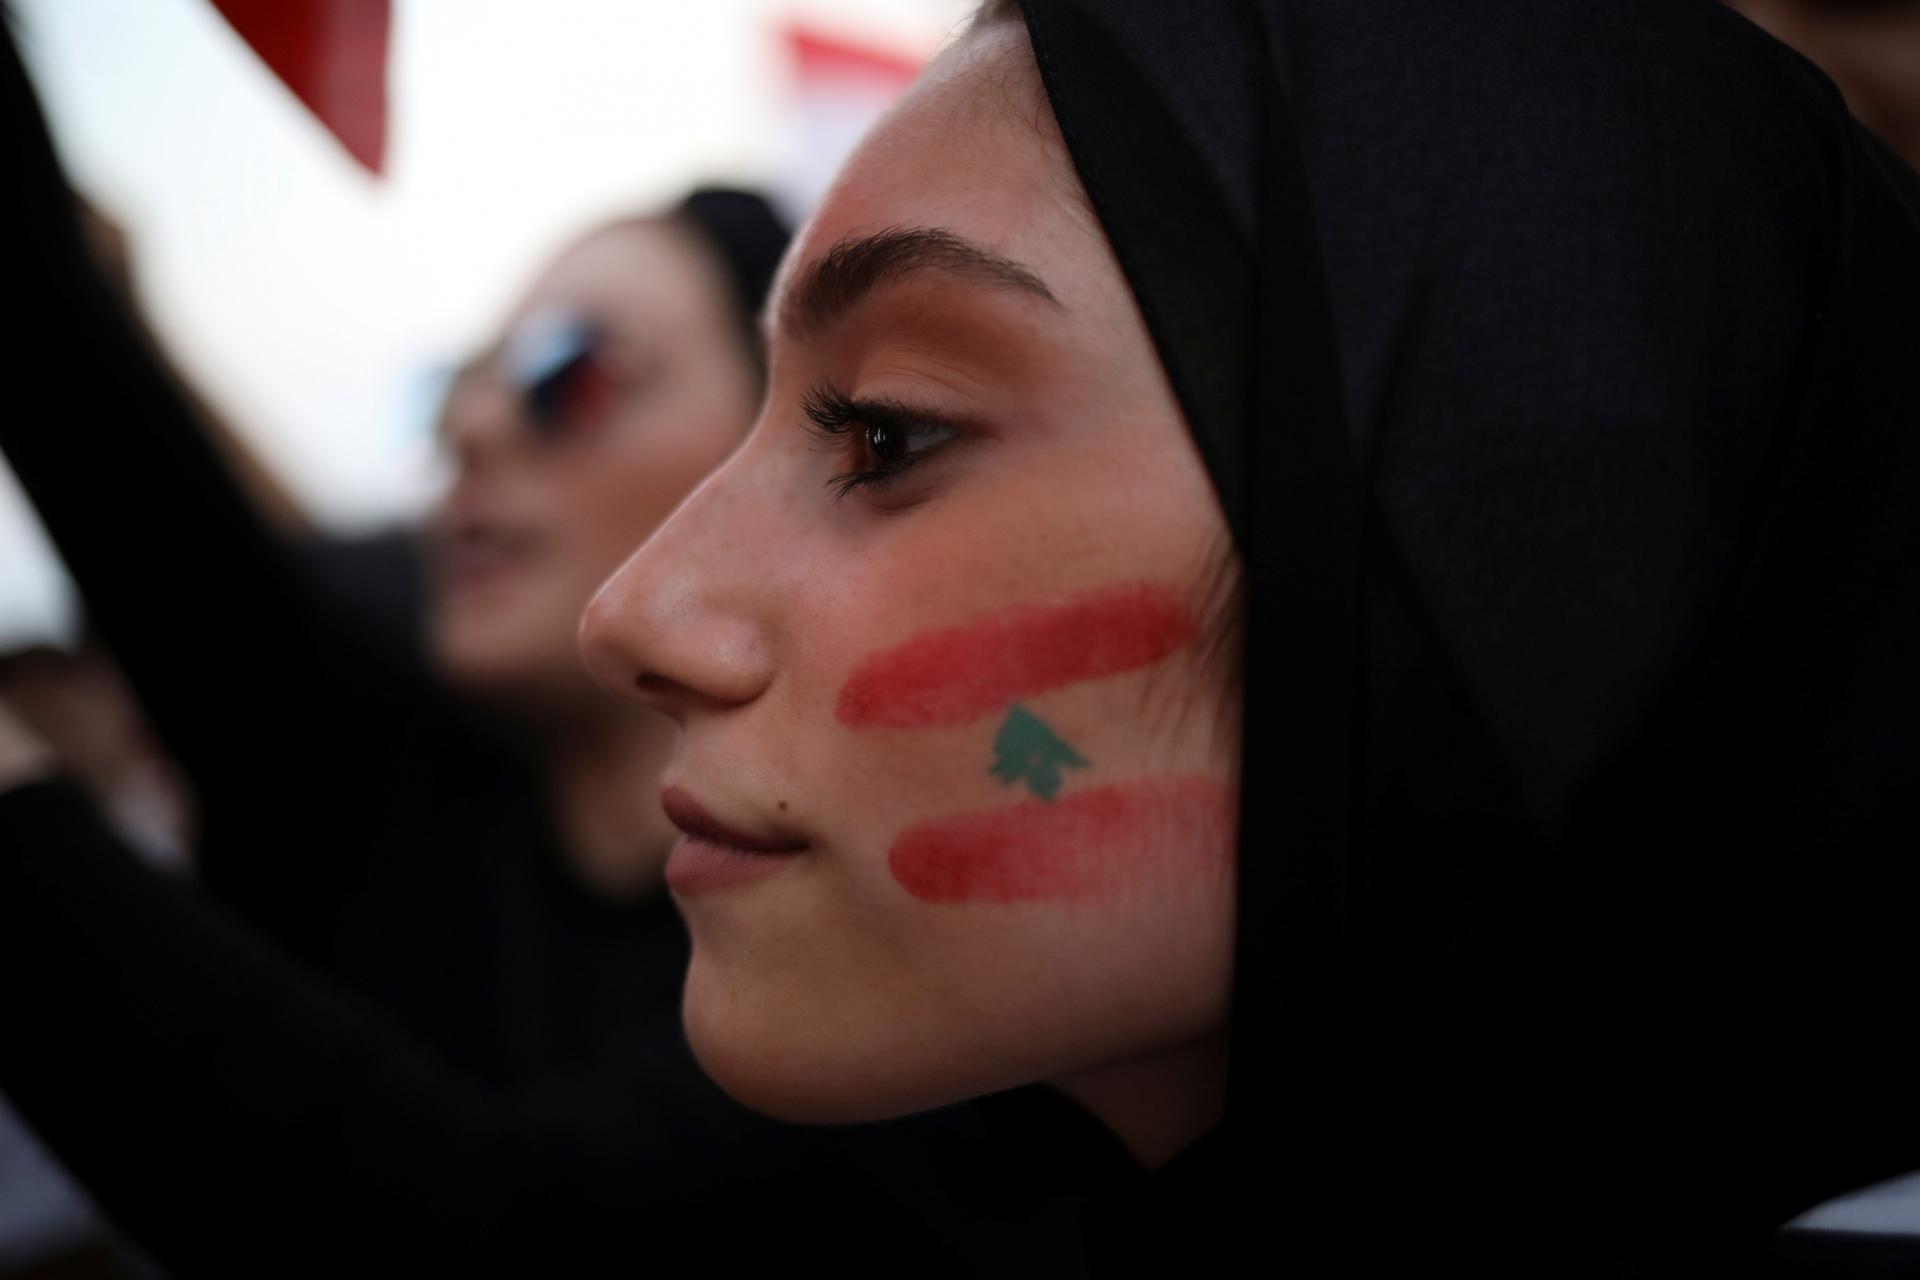 A demonstrator with a Lebanese national flag drawn on her face takes part in an anti-government protest in downtown Beirut, Lebanon, on October 22, 2019